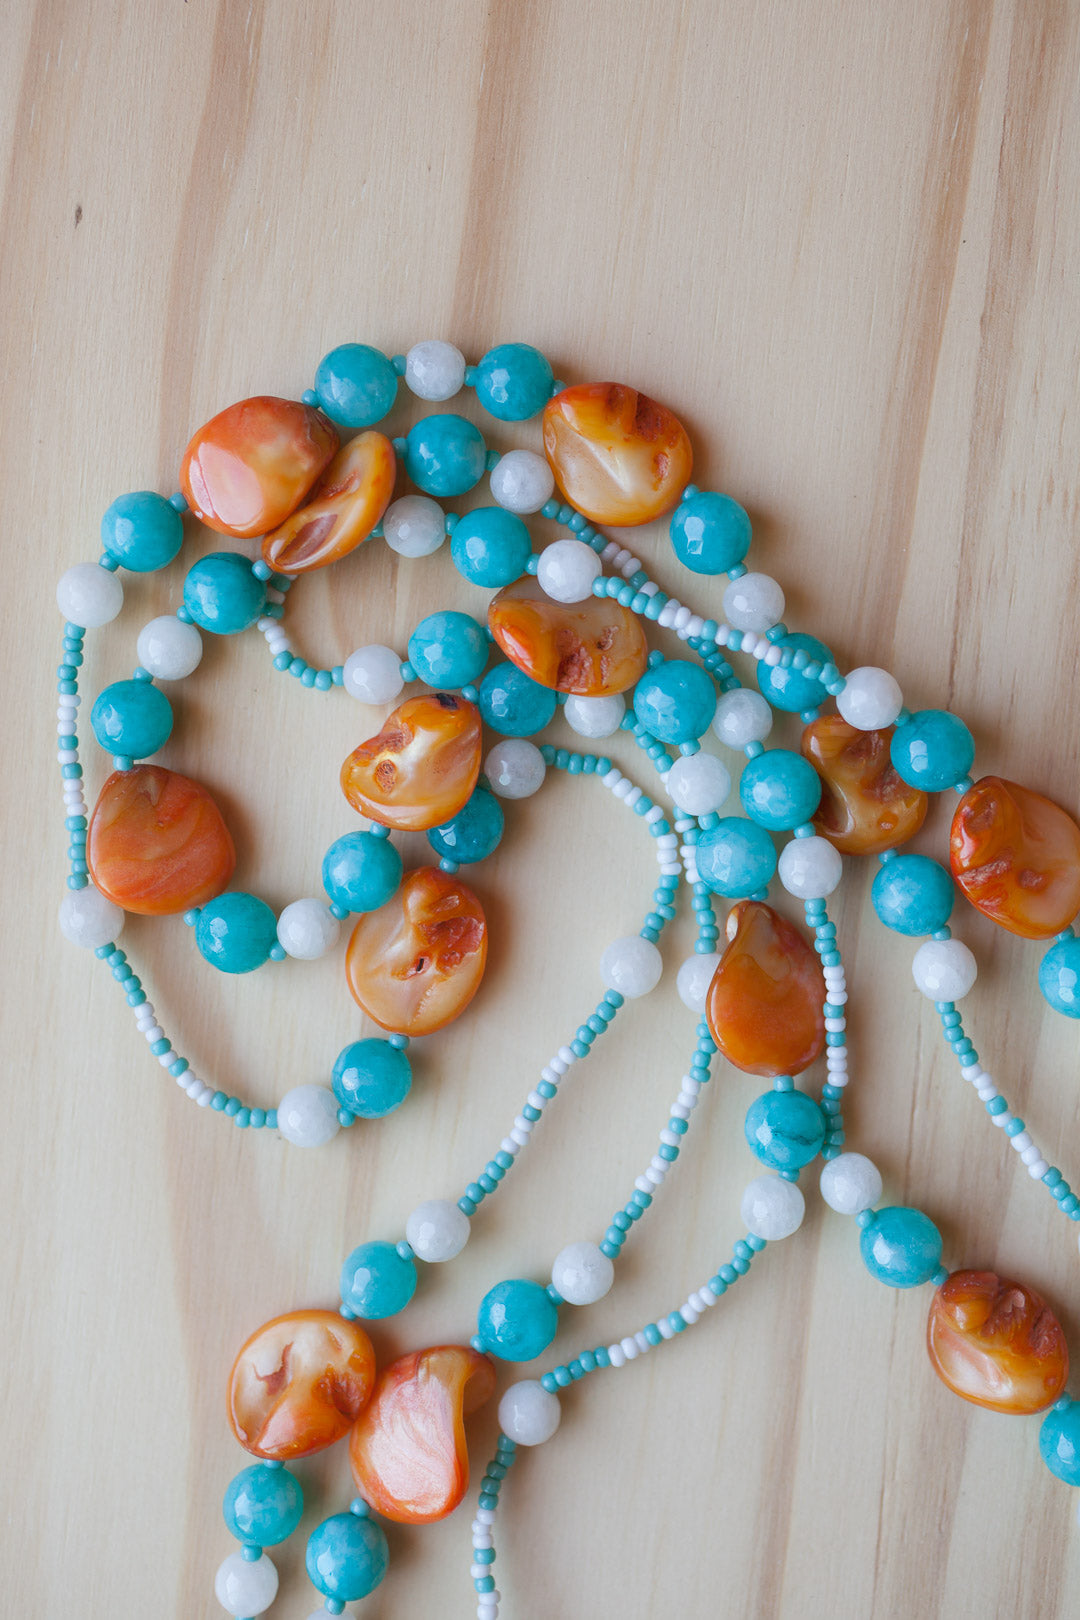 60" Extra Long Orange Shell Beaded Necklace with Turquoise & White Agate Beads